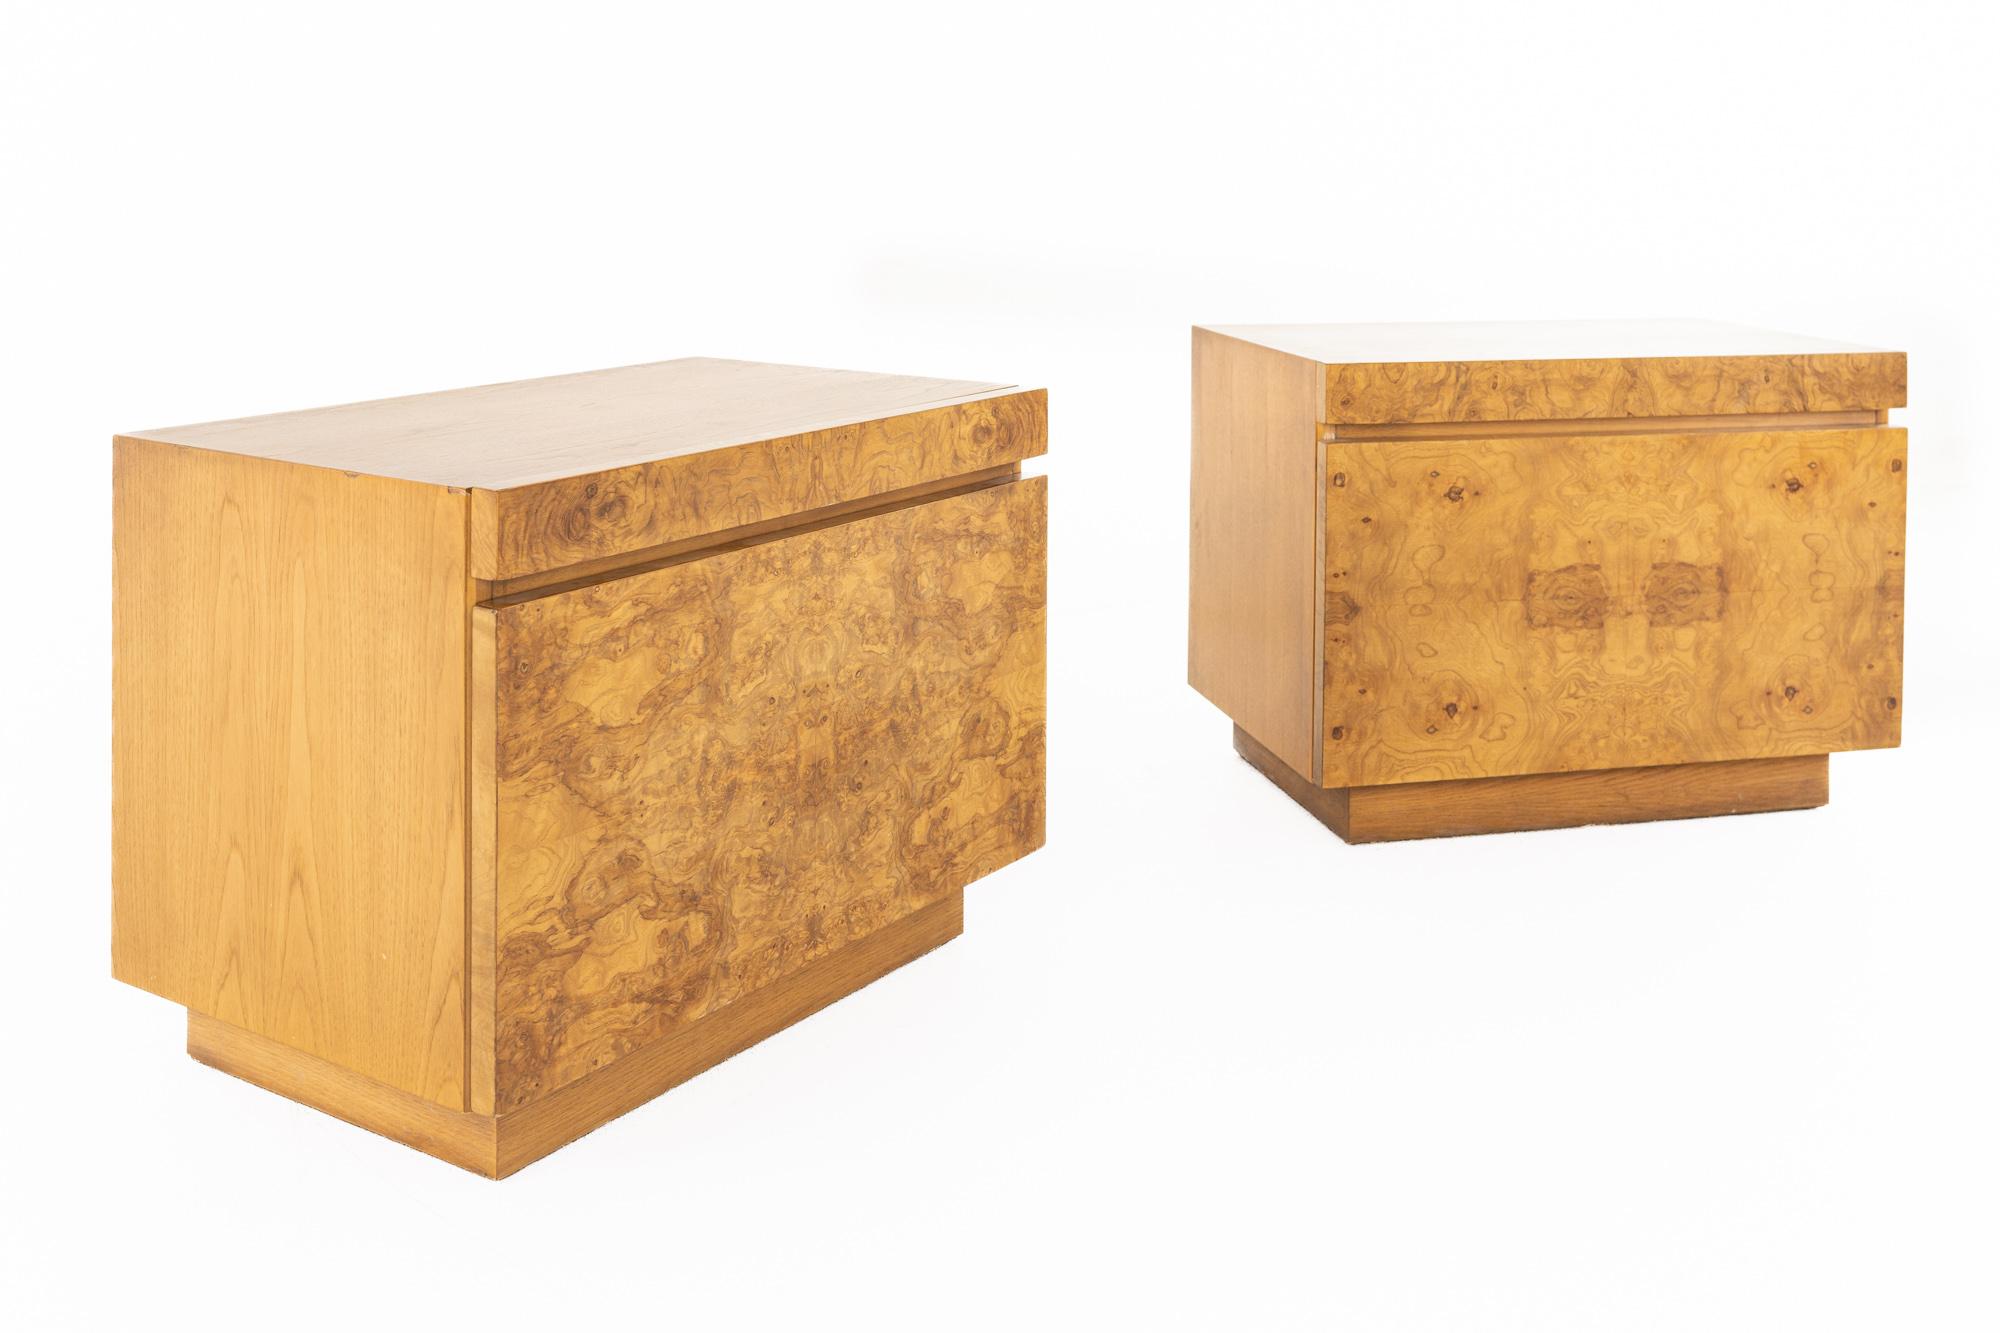 Milo Baughman for lane mid century burlwood nightstands - a pair

These nightstands measure: 26 wide x 17 deep x 20 inches high

All pieces of furniture can be had in what we call restored vintage condition. That means the piece is restored upon